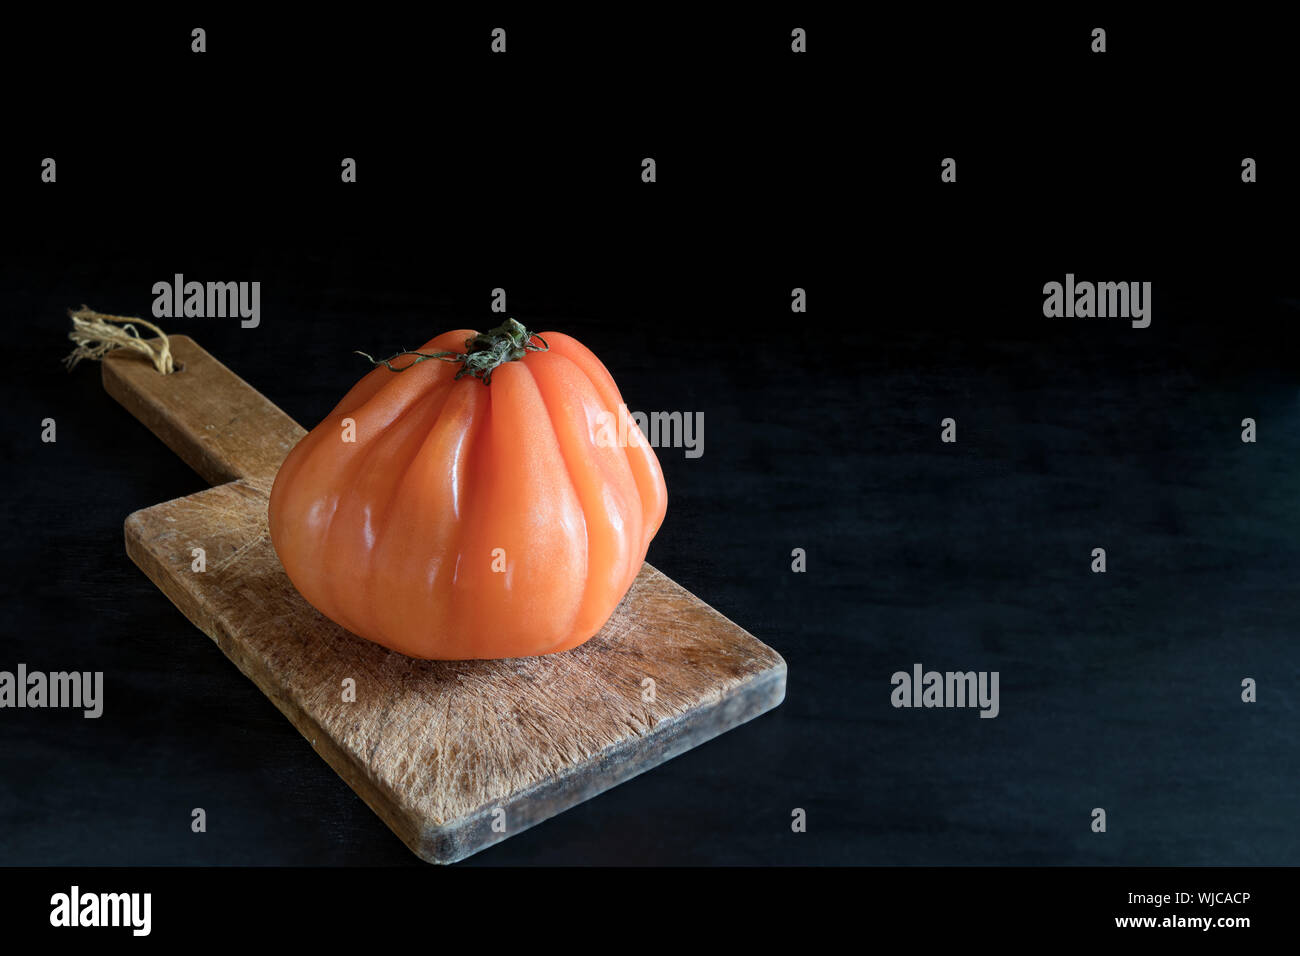 Colorful juicy ugly tomato on wooden cutting board on a black backgound, rustic style and low key with copy space Stock Photo